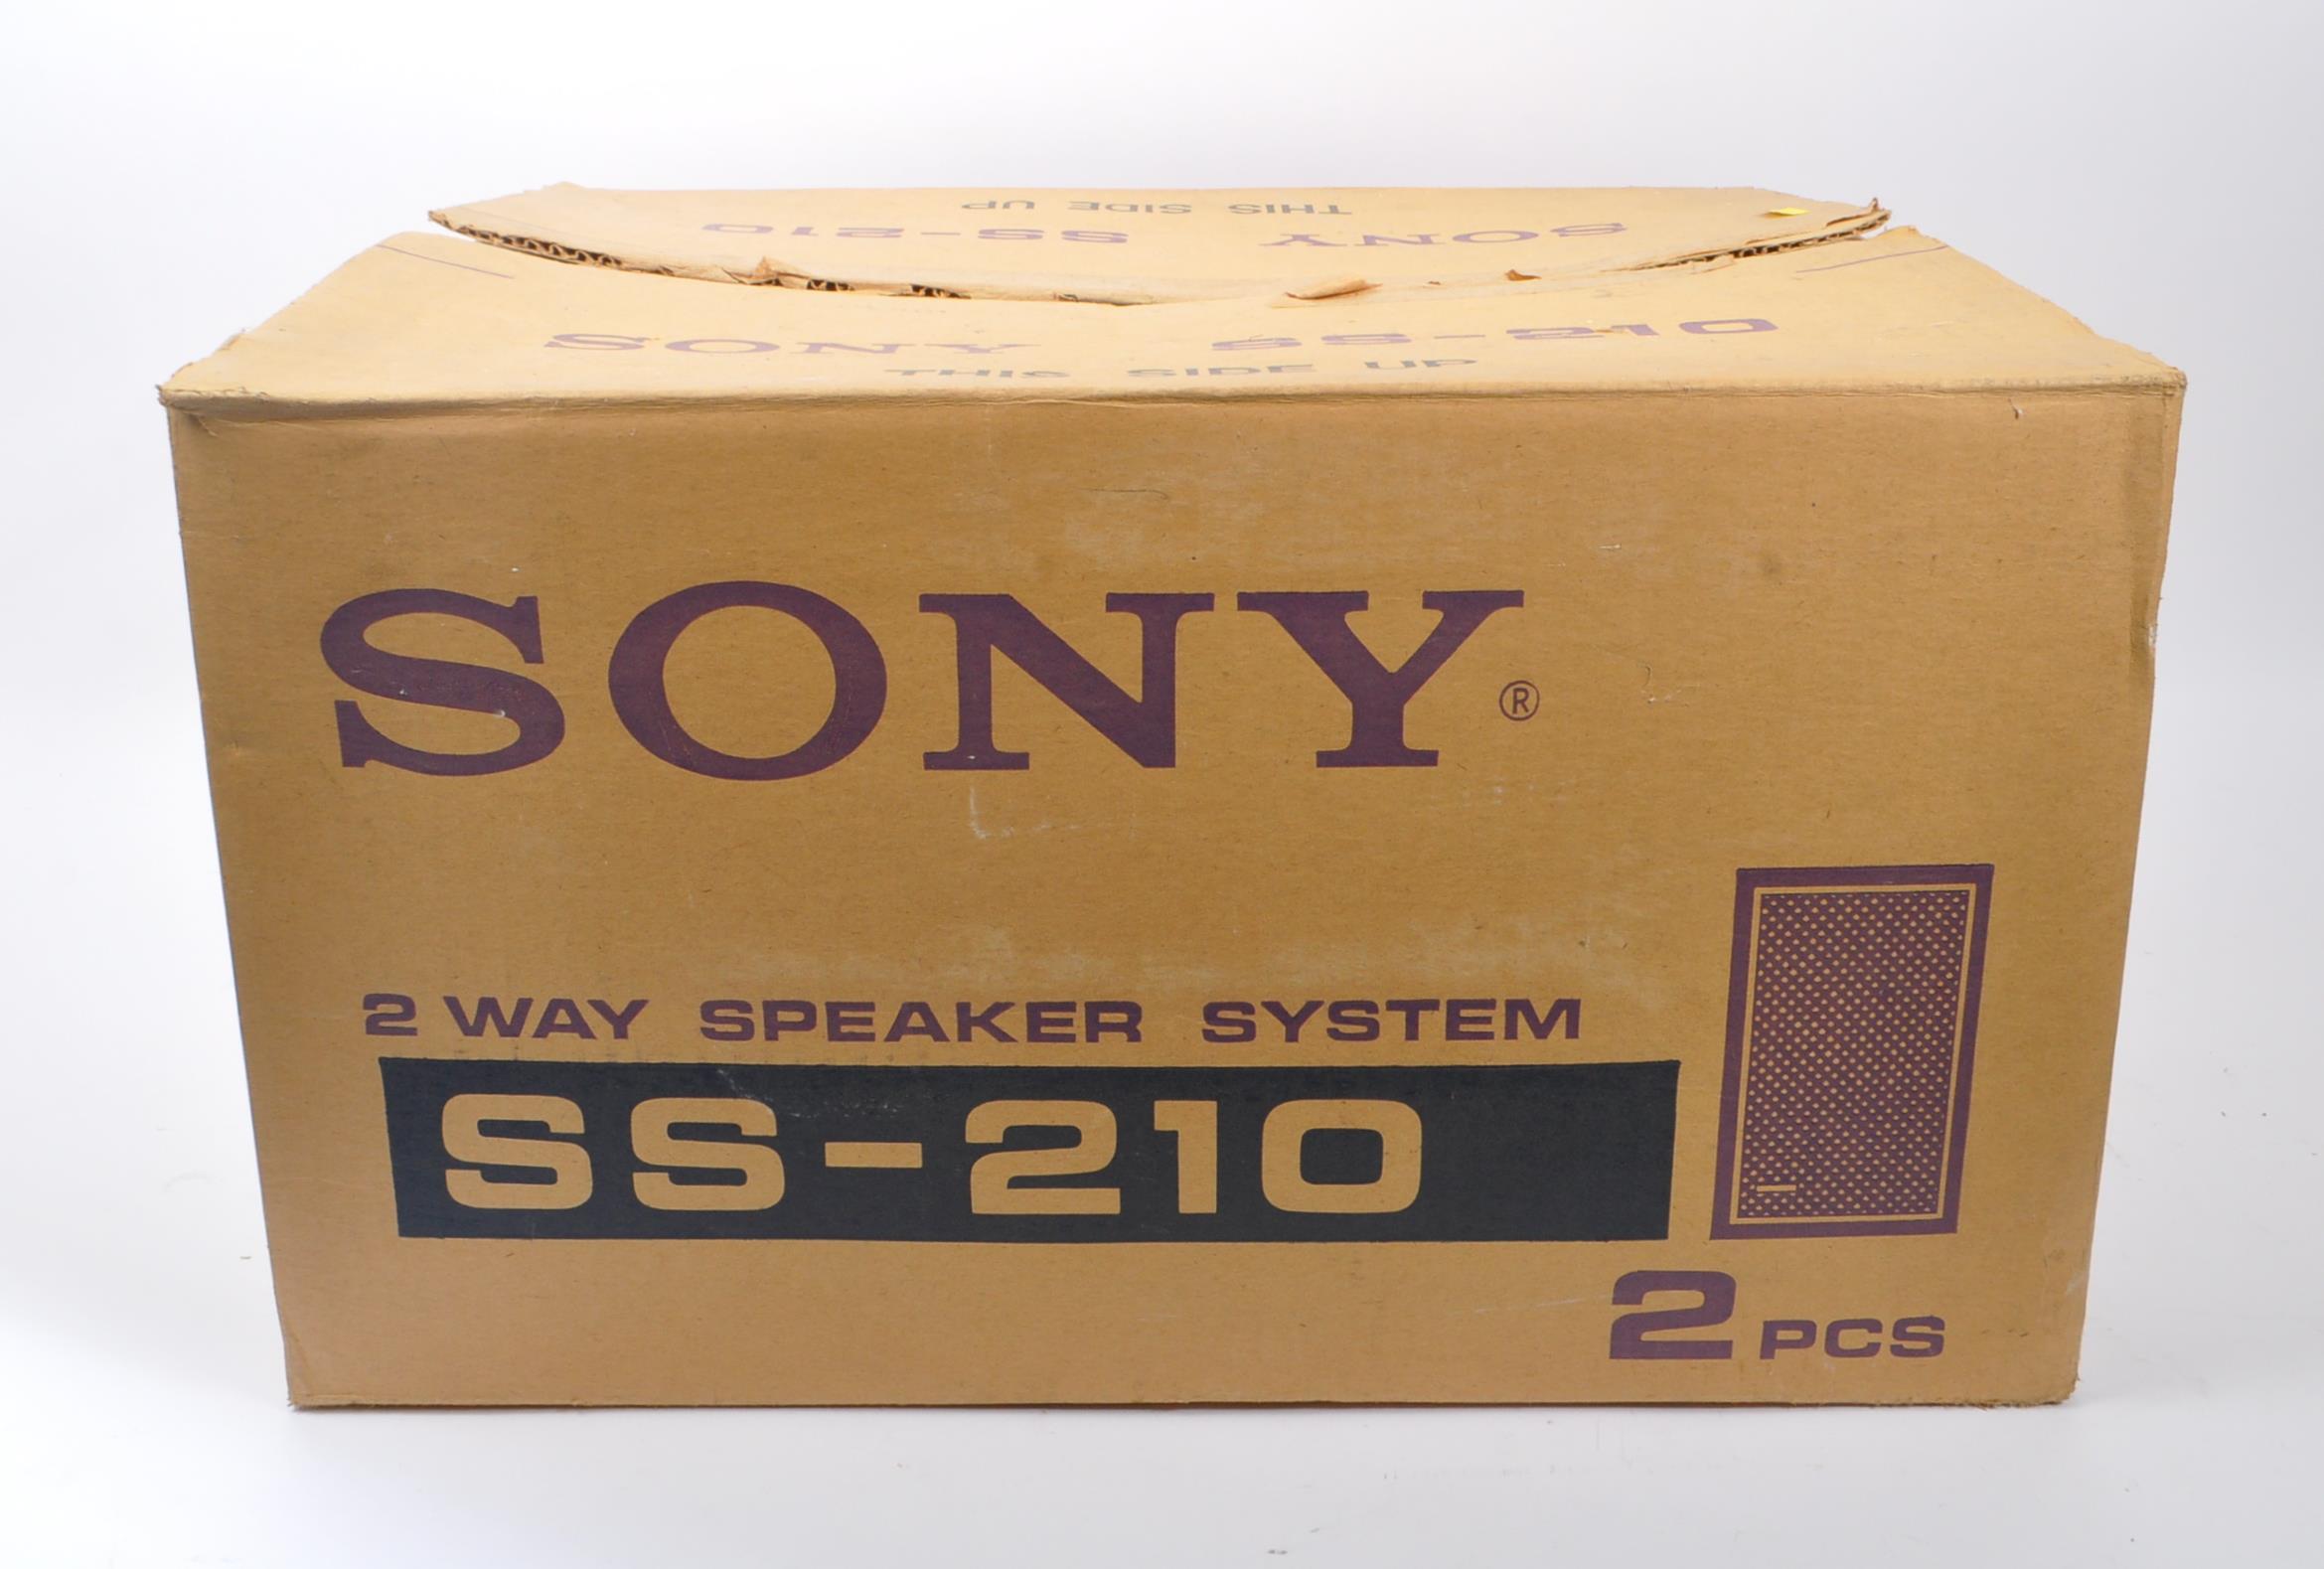 SONY - 1972 HP-239A MUSIC SYSTEM & SPEAKERS - Image 6 of 6